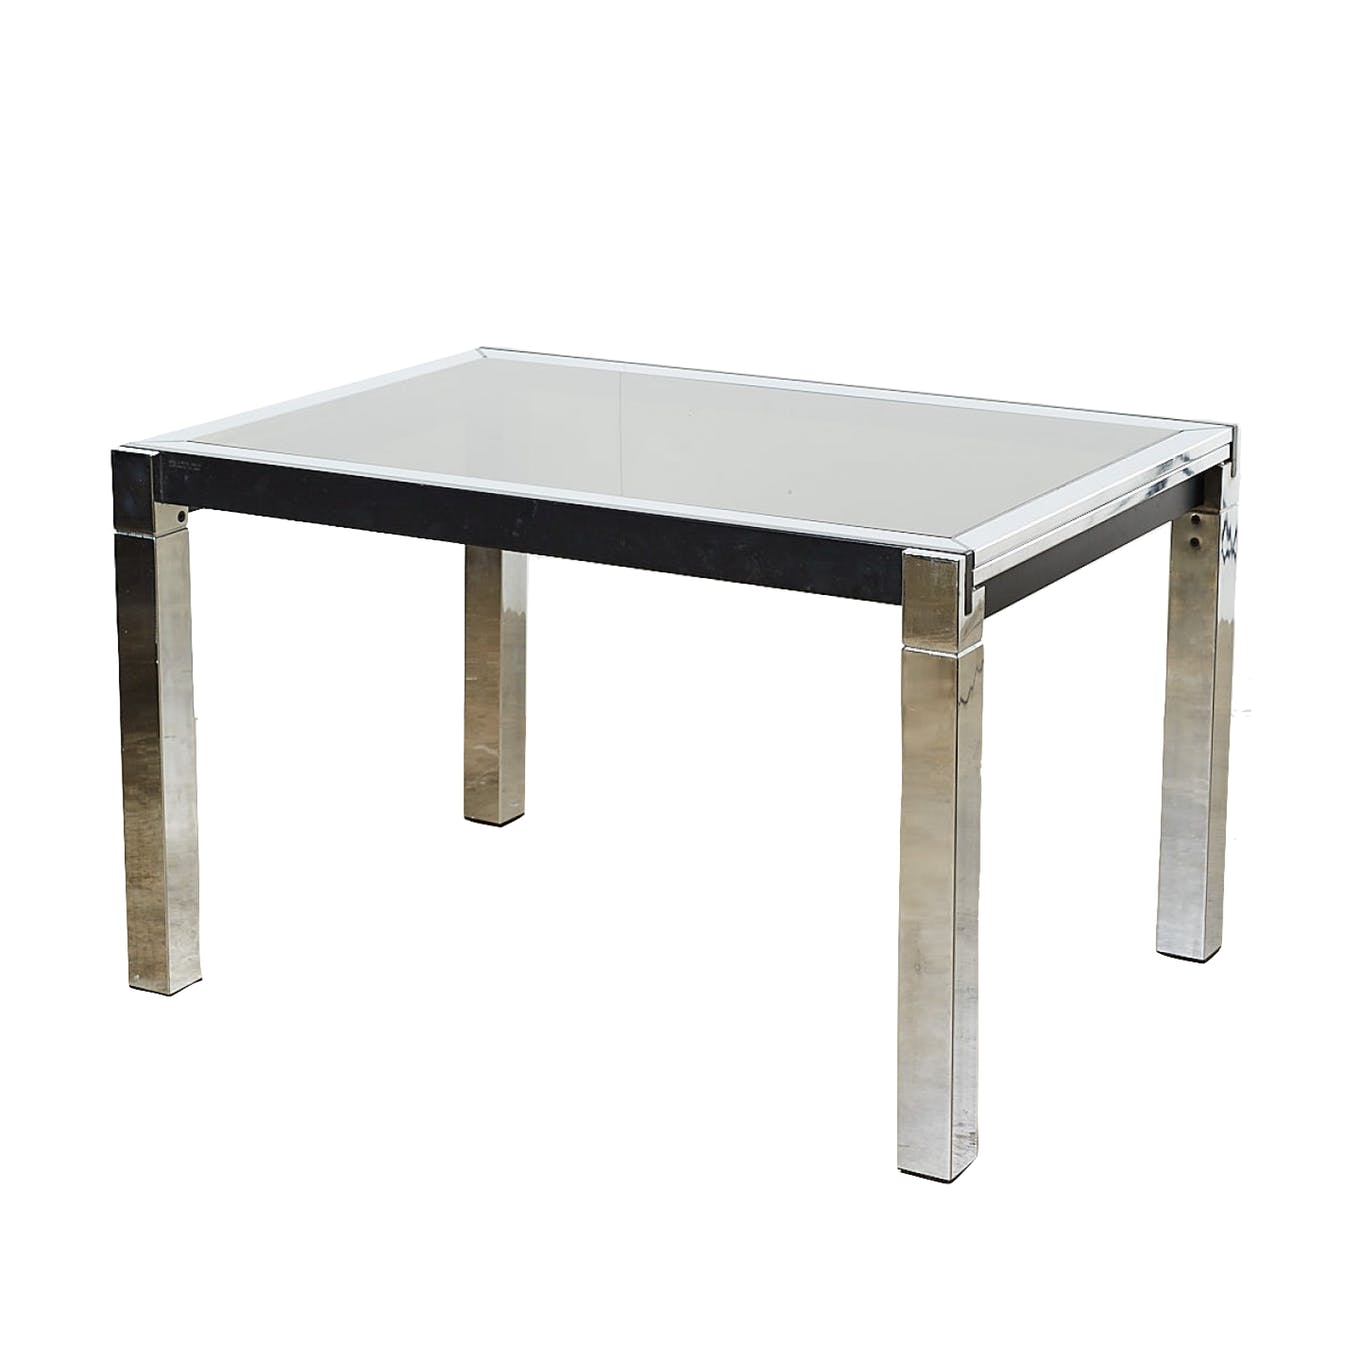 Featured image for “Table extensible : design La Metal Arredo Paderno D. Milano années 70”